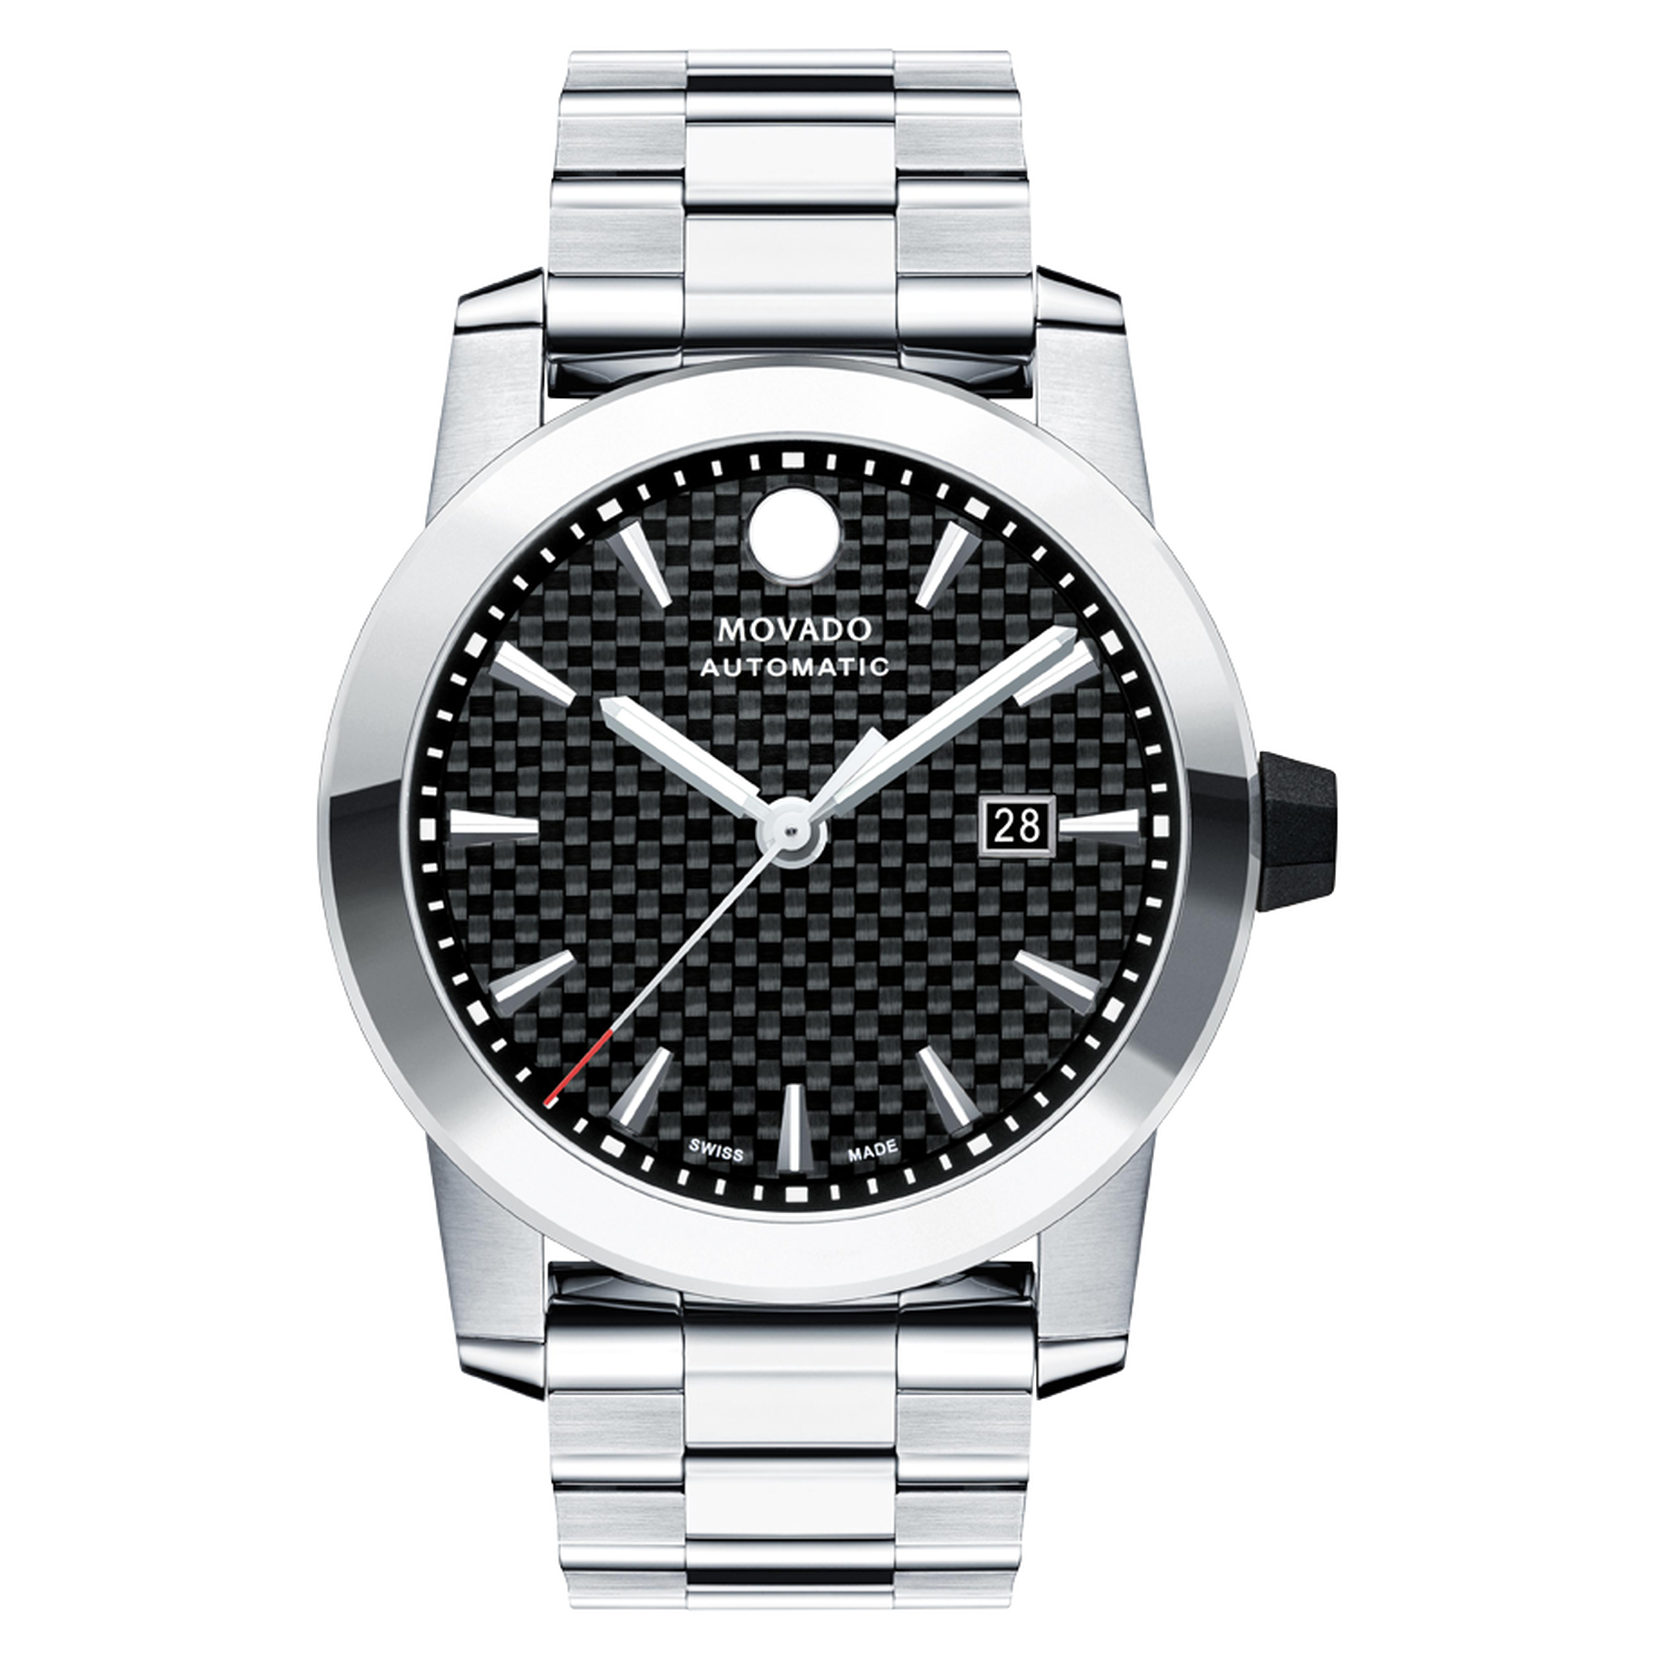 Movado | Vizio Men's Automatic stainless steel watch and black dial,  featuring Swiss Super-LumiNova